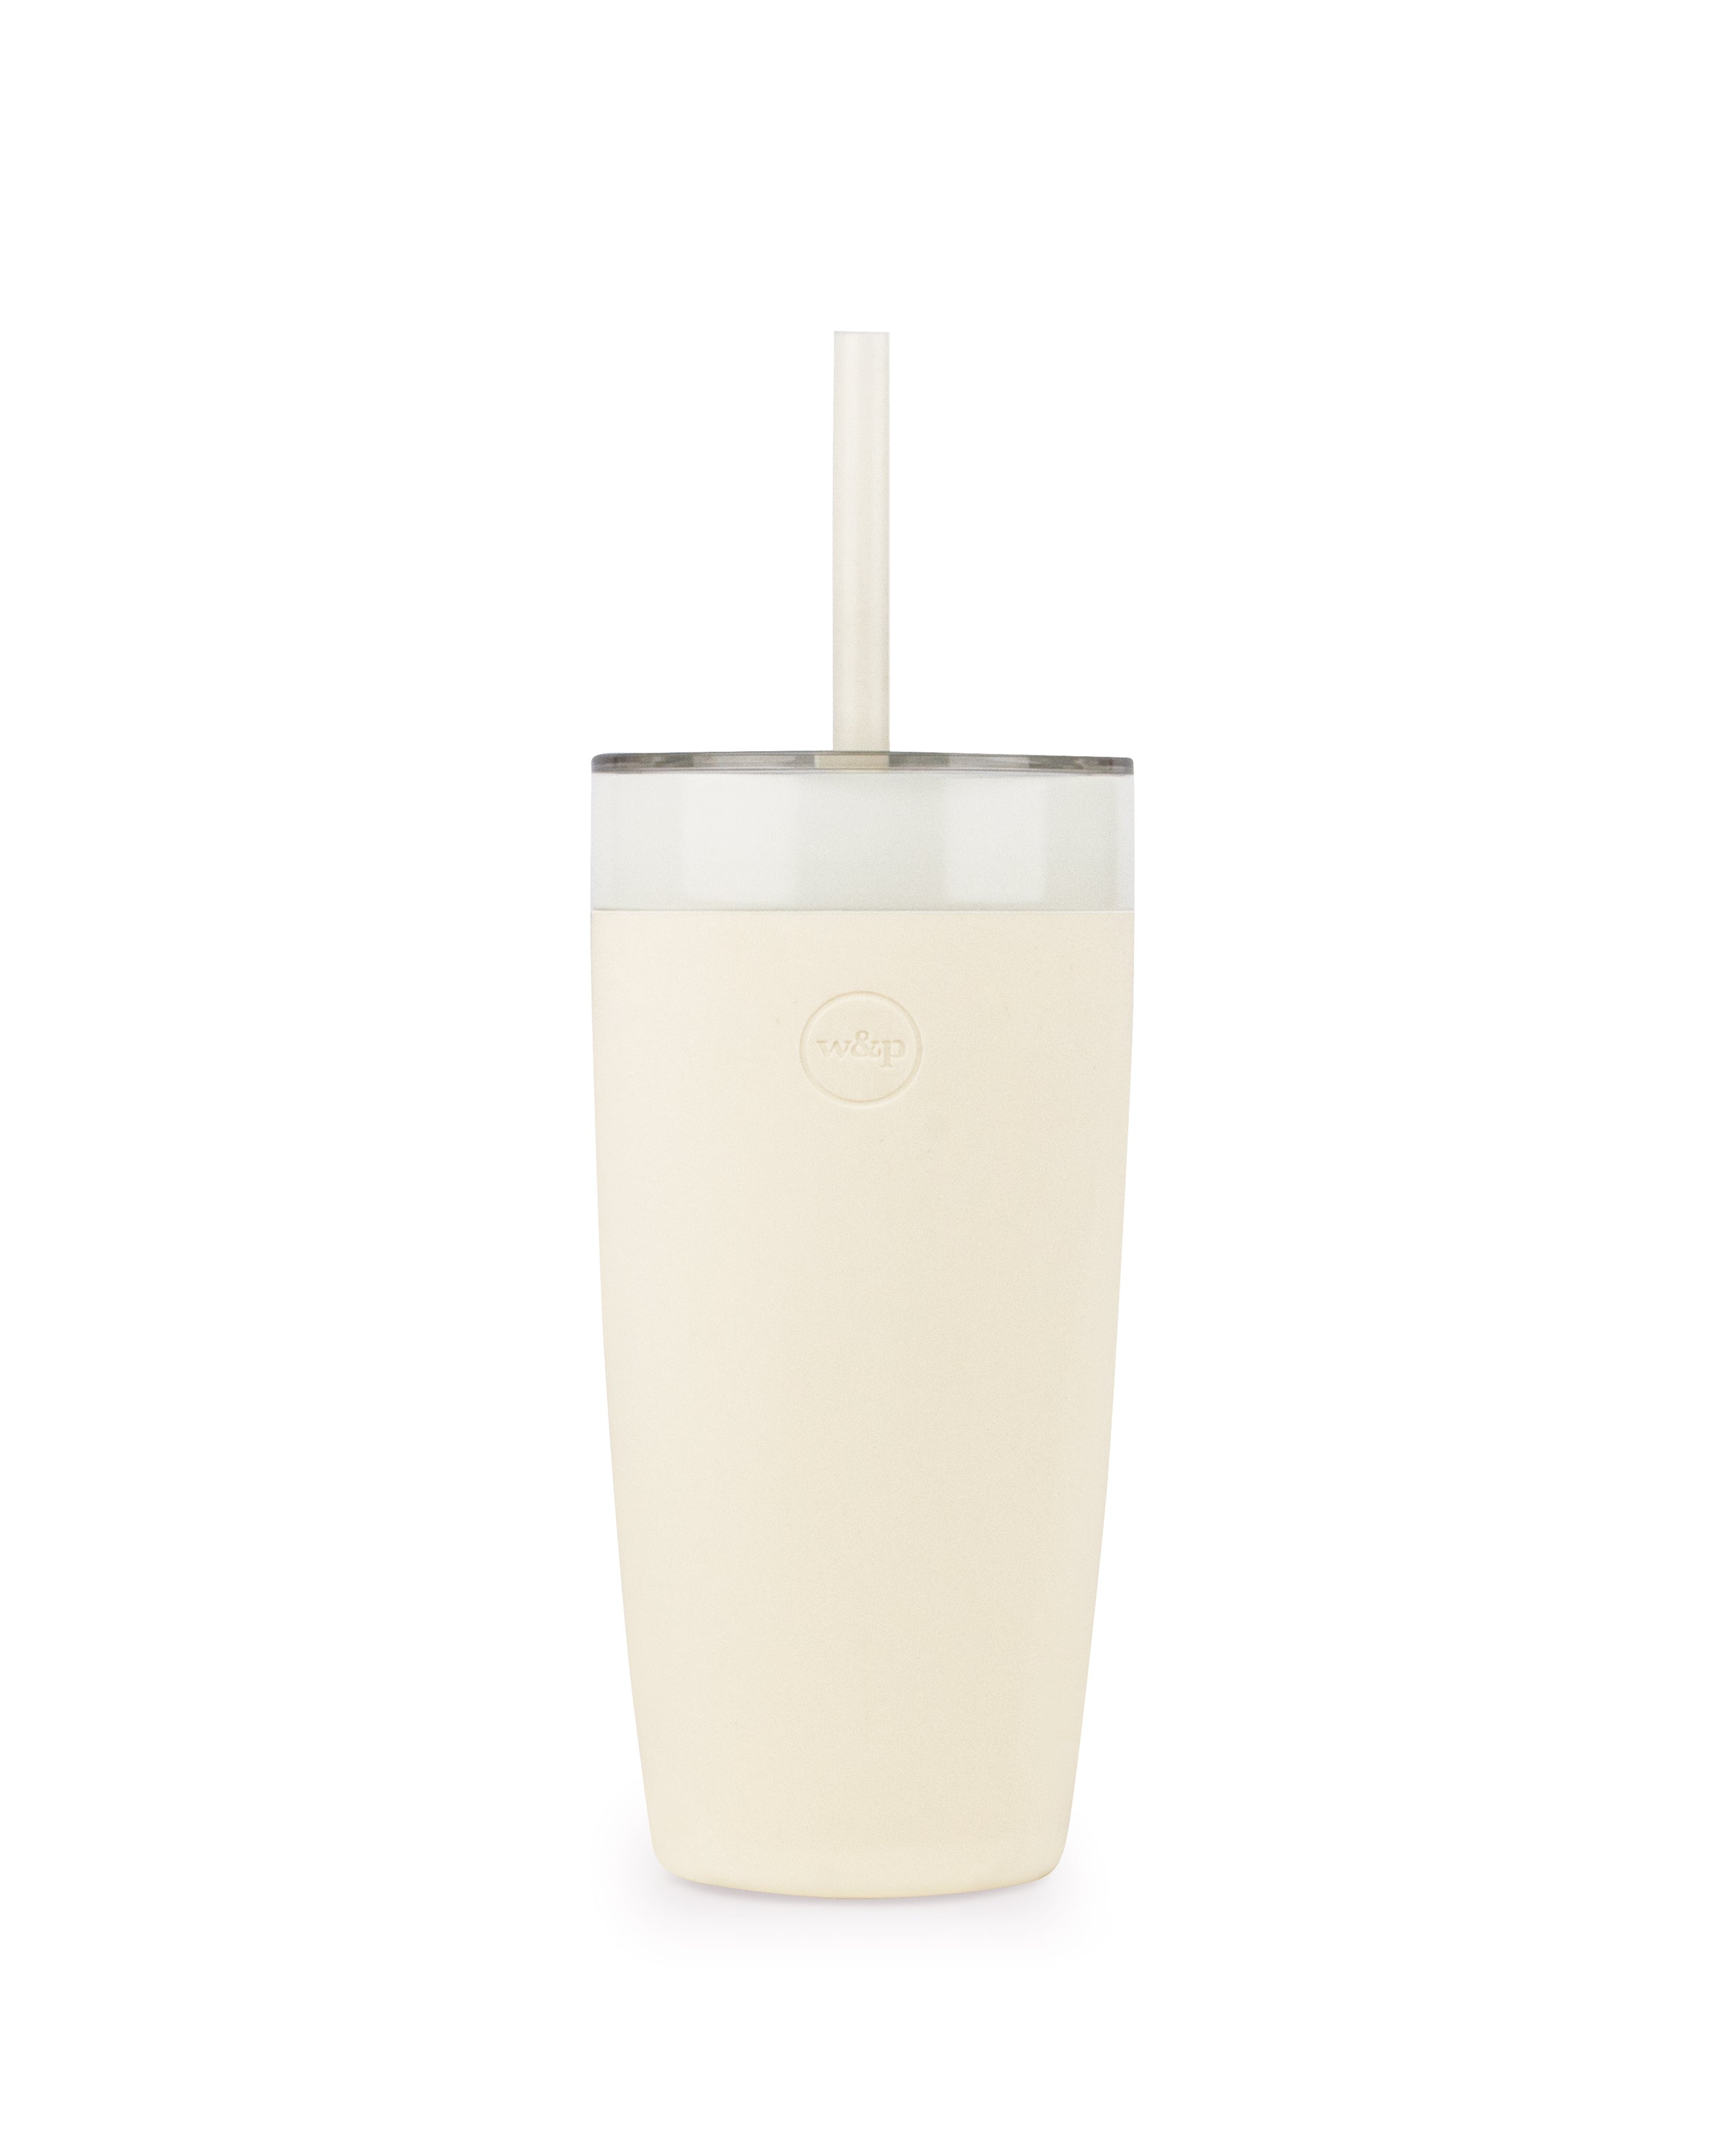 Dropship Mug Tumbler With Handle Insulated Tumbler With Lids Straw